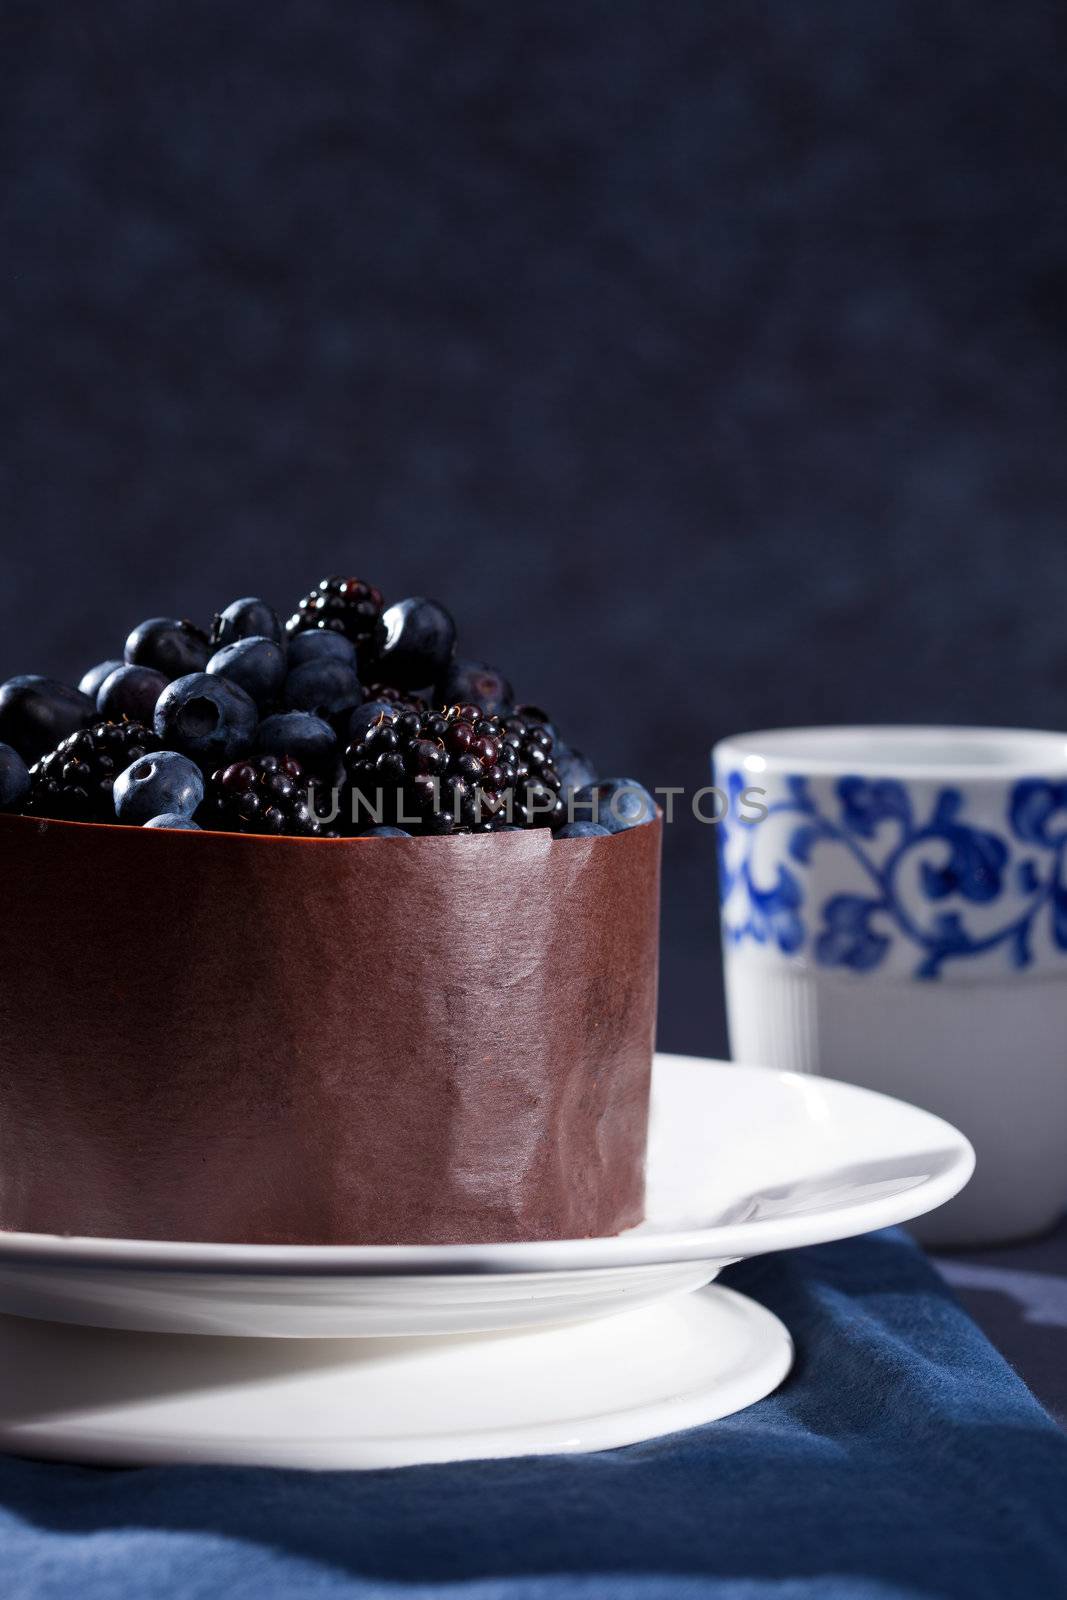 Beautiful cake filled with blueberries and black berries on top